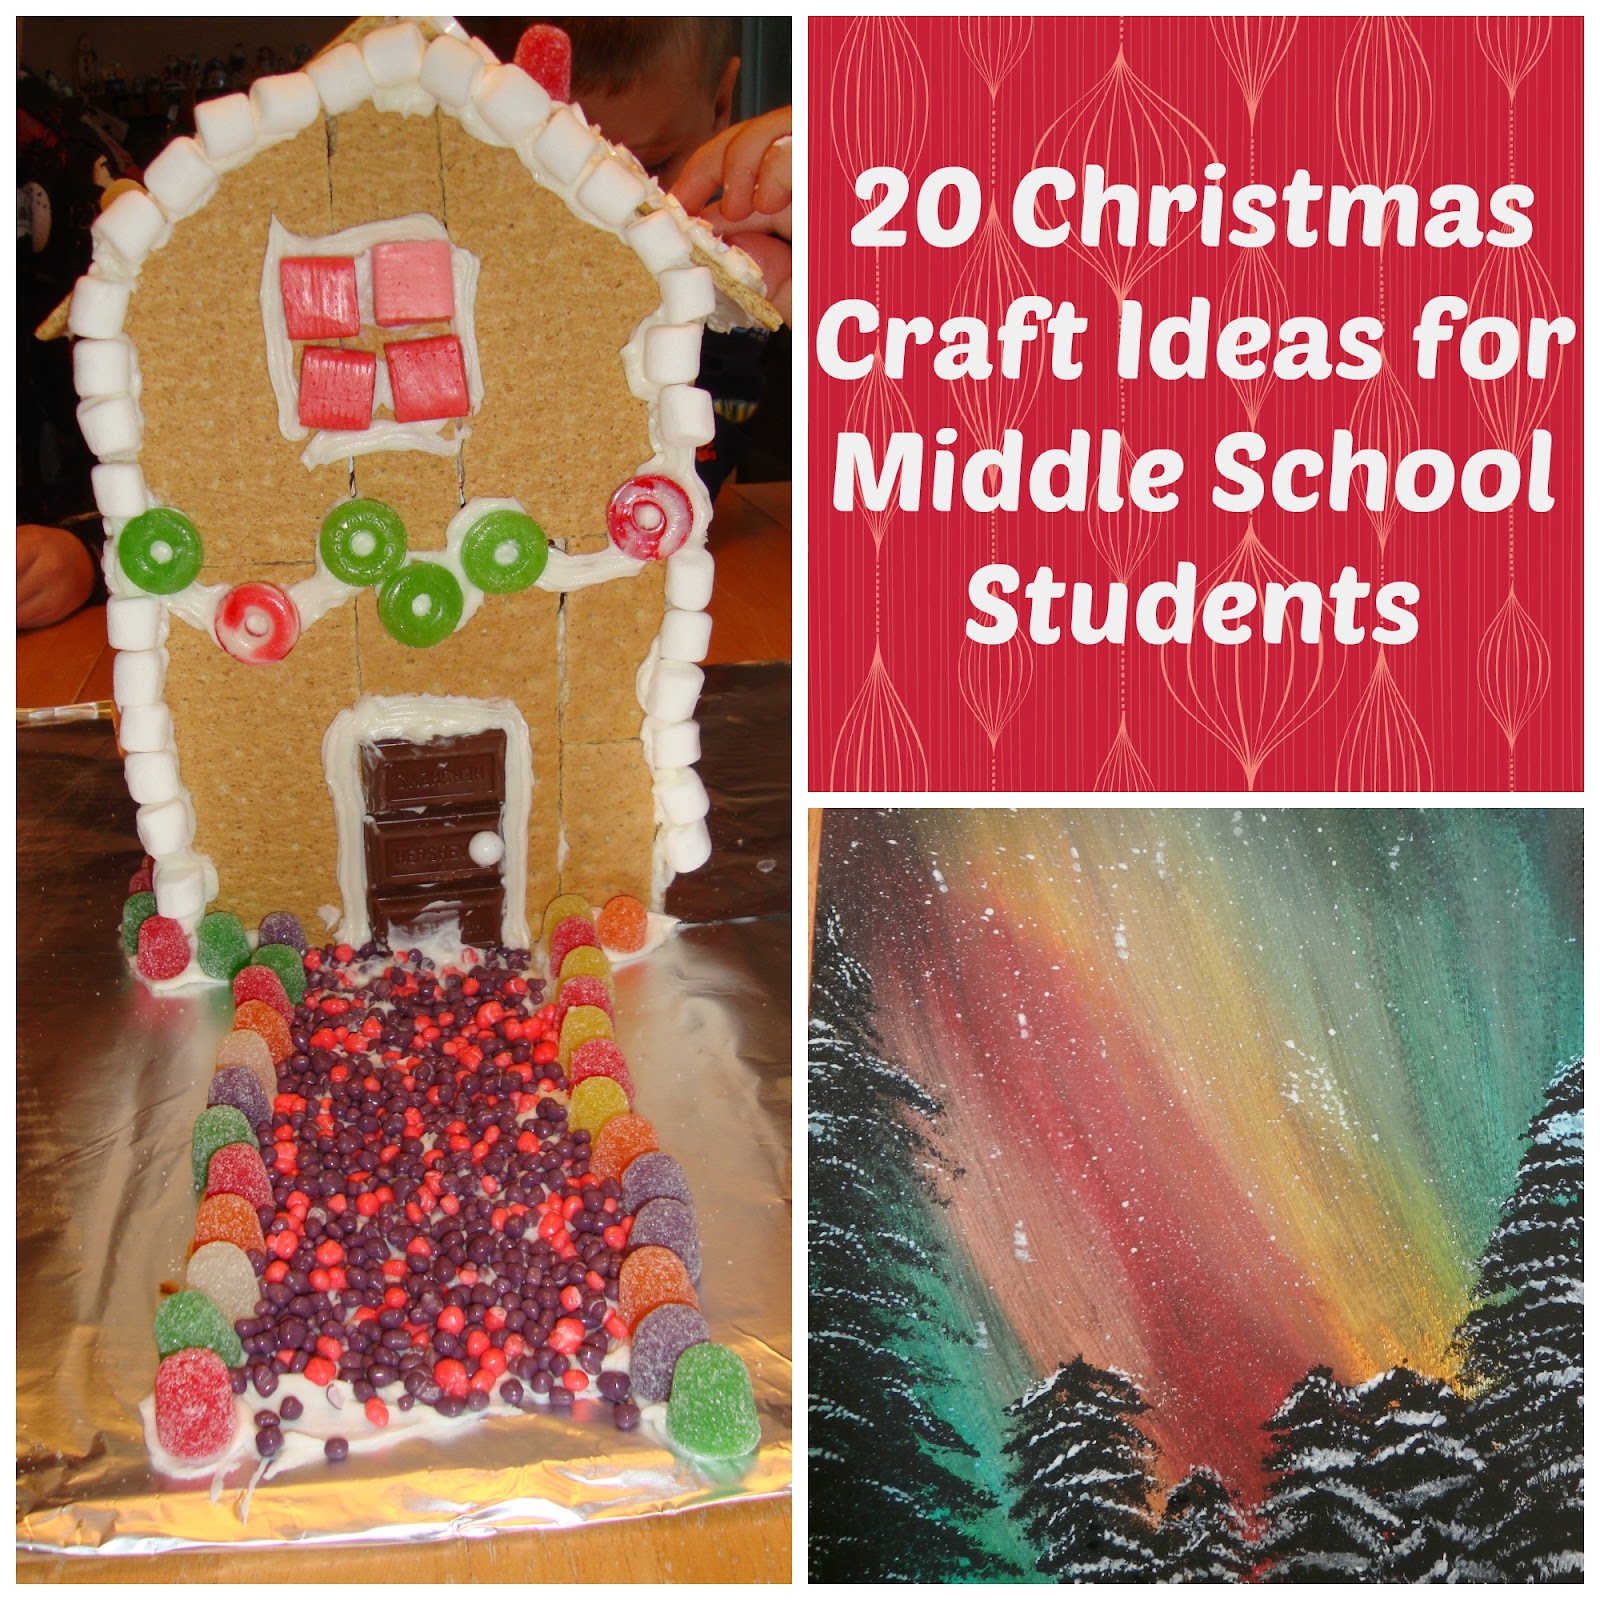 Our Unschooling Journey Through Life: Christmas Crafts for Middle